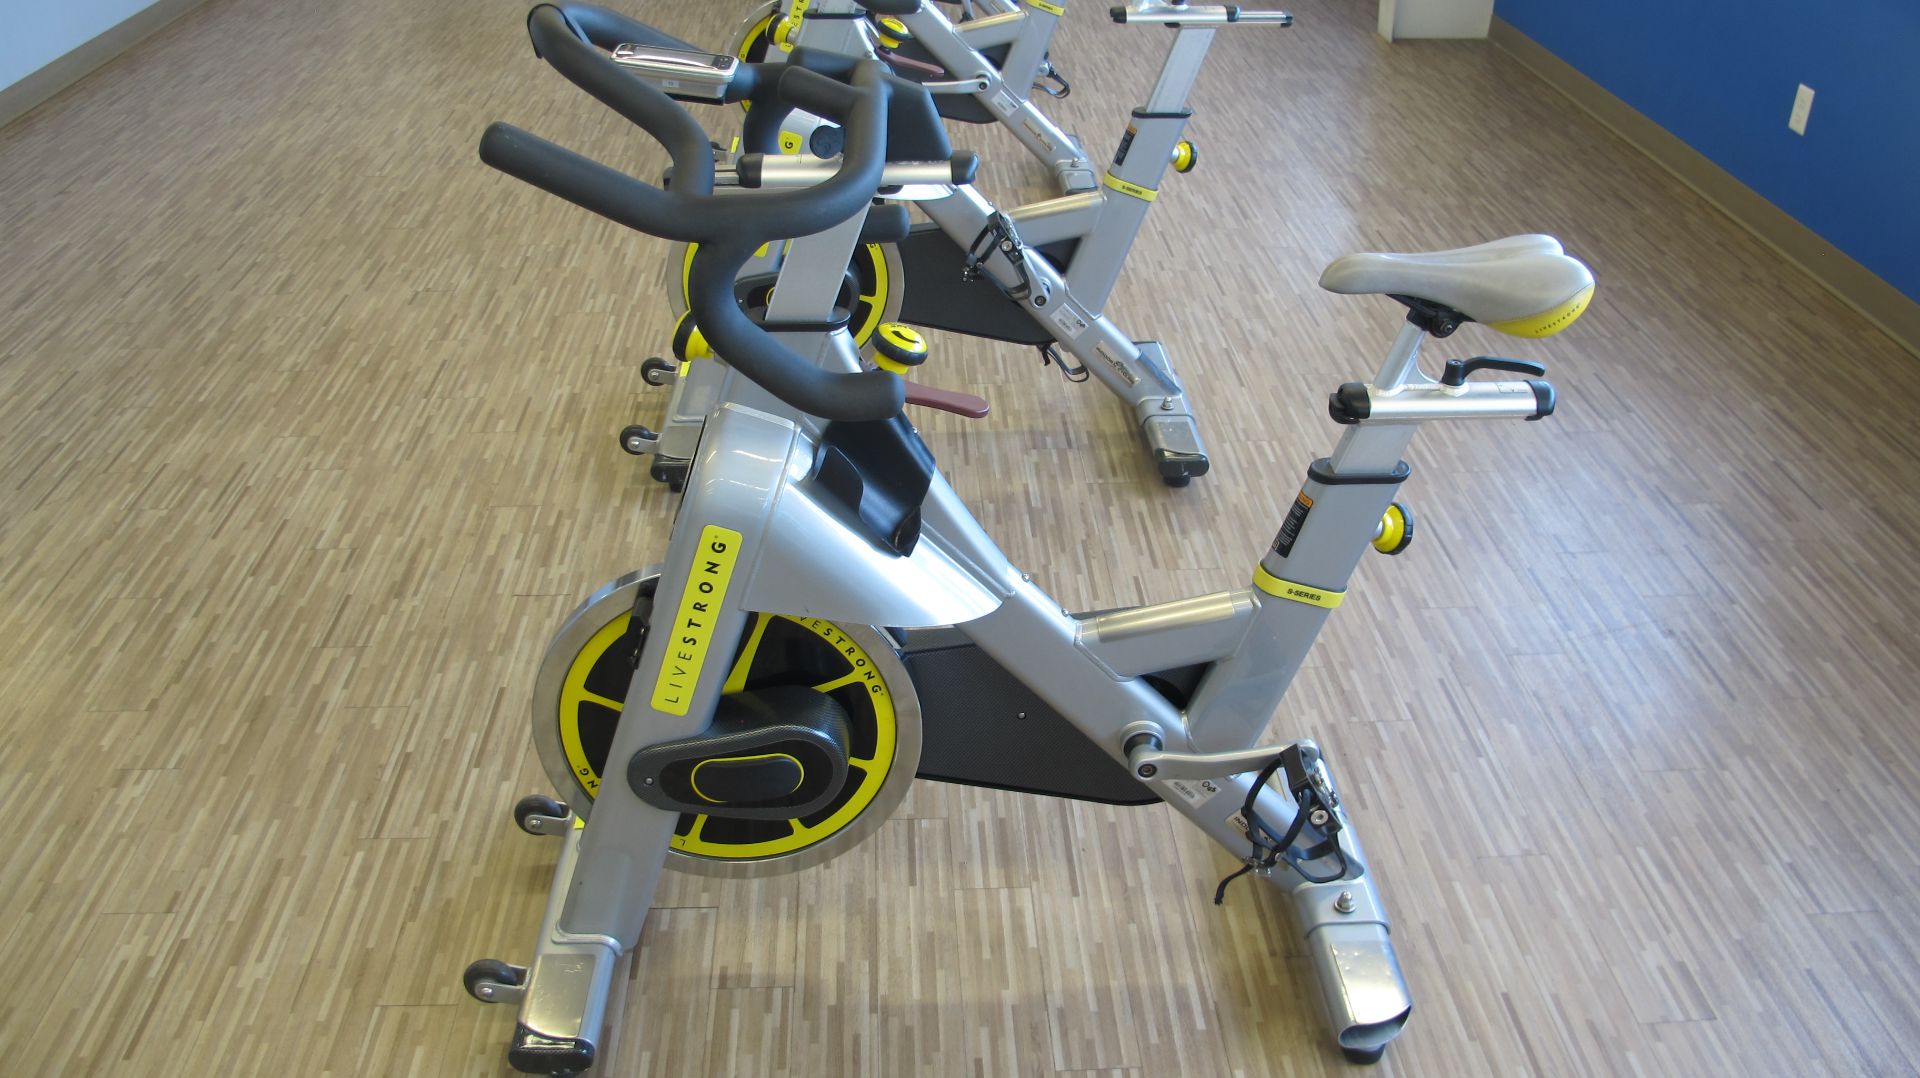 LIVESTRONG LS S-Series Class S Stationary Spin Bike, S/N: LASB0008036-111 - Image 5 of 10